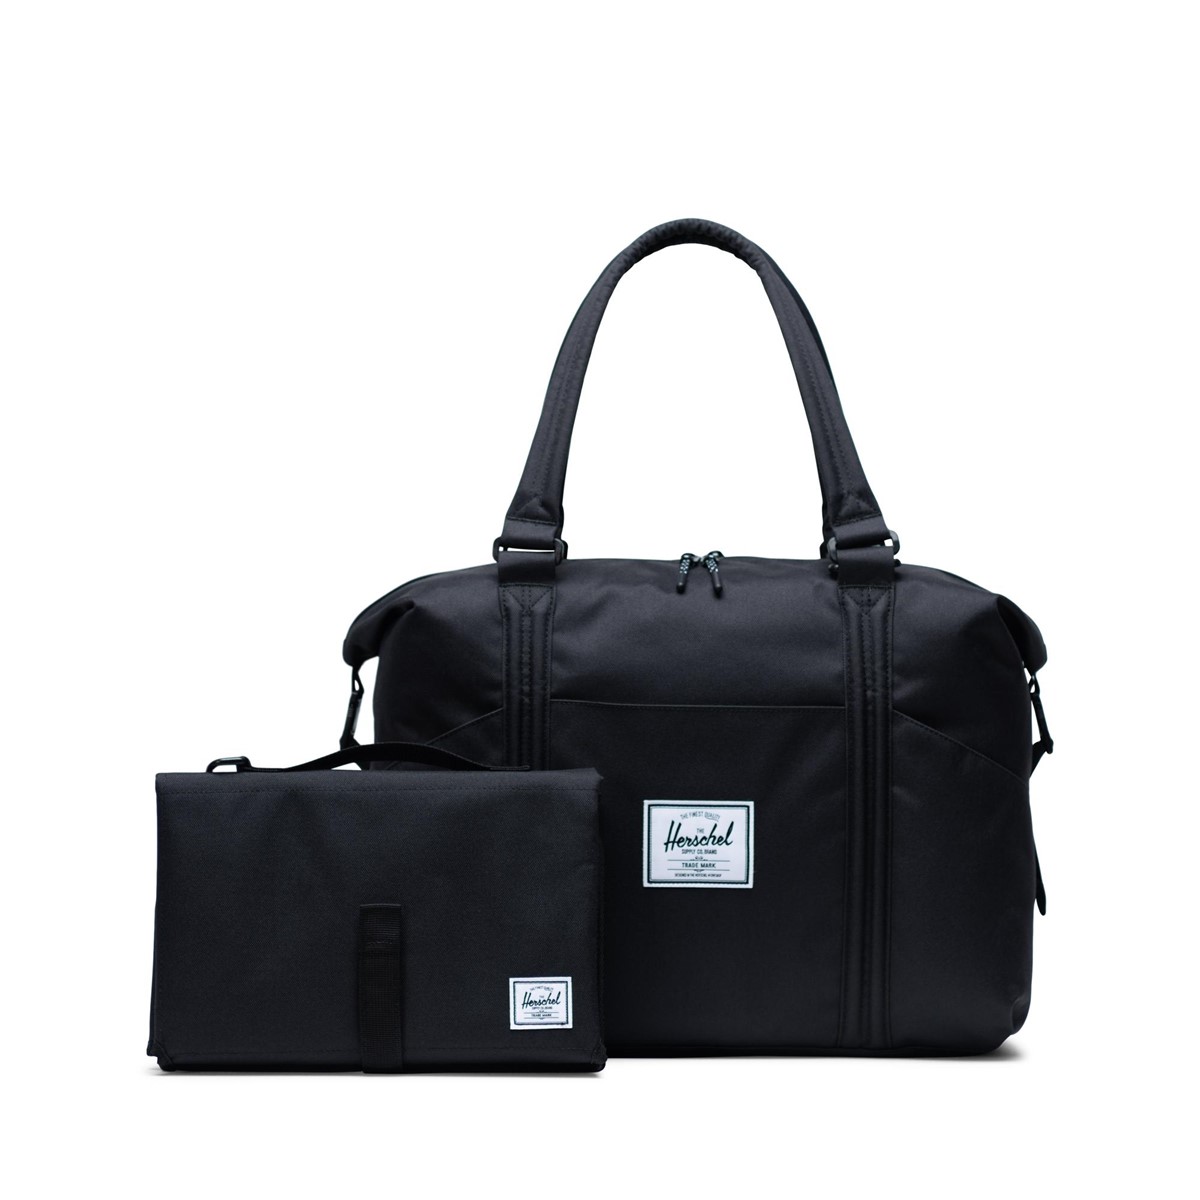 Strand Sprout Tote Bag in Black